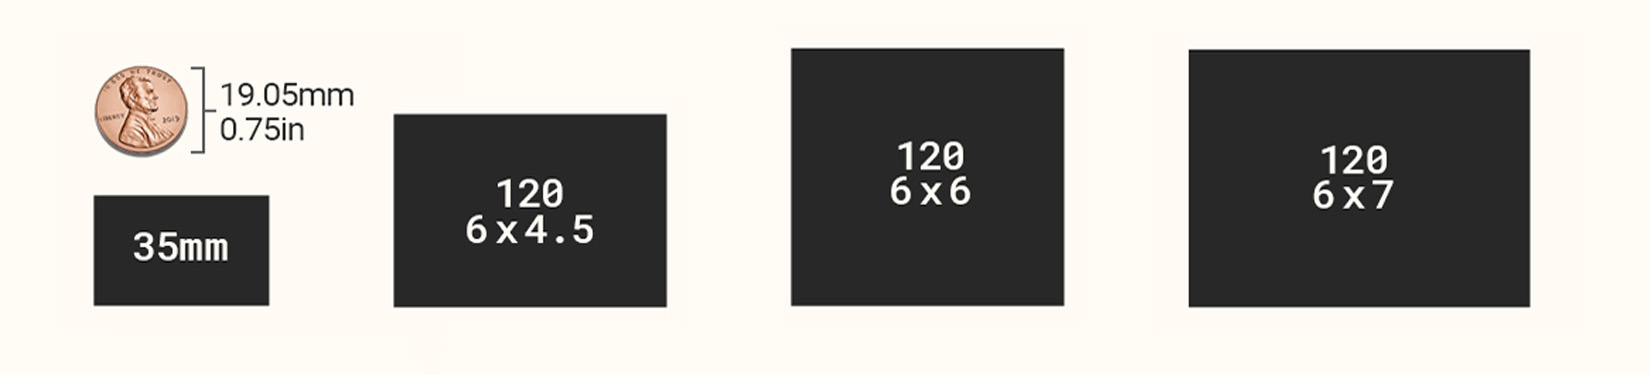 Graphic demonstrating the size differences medium format film formats.